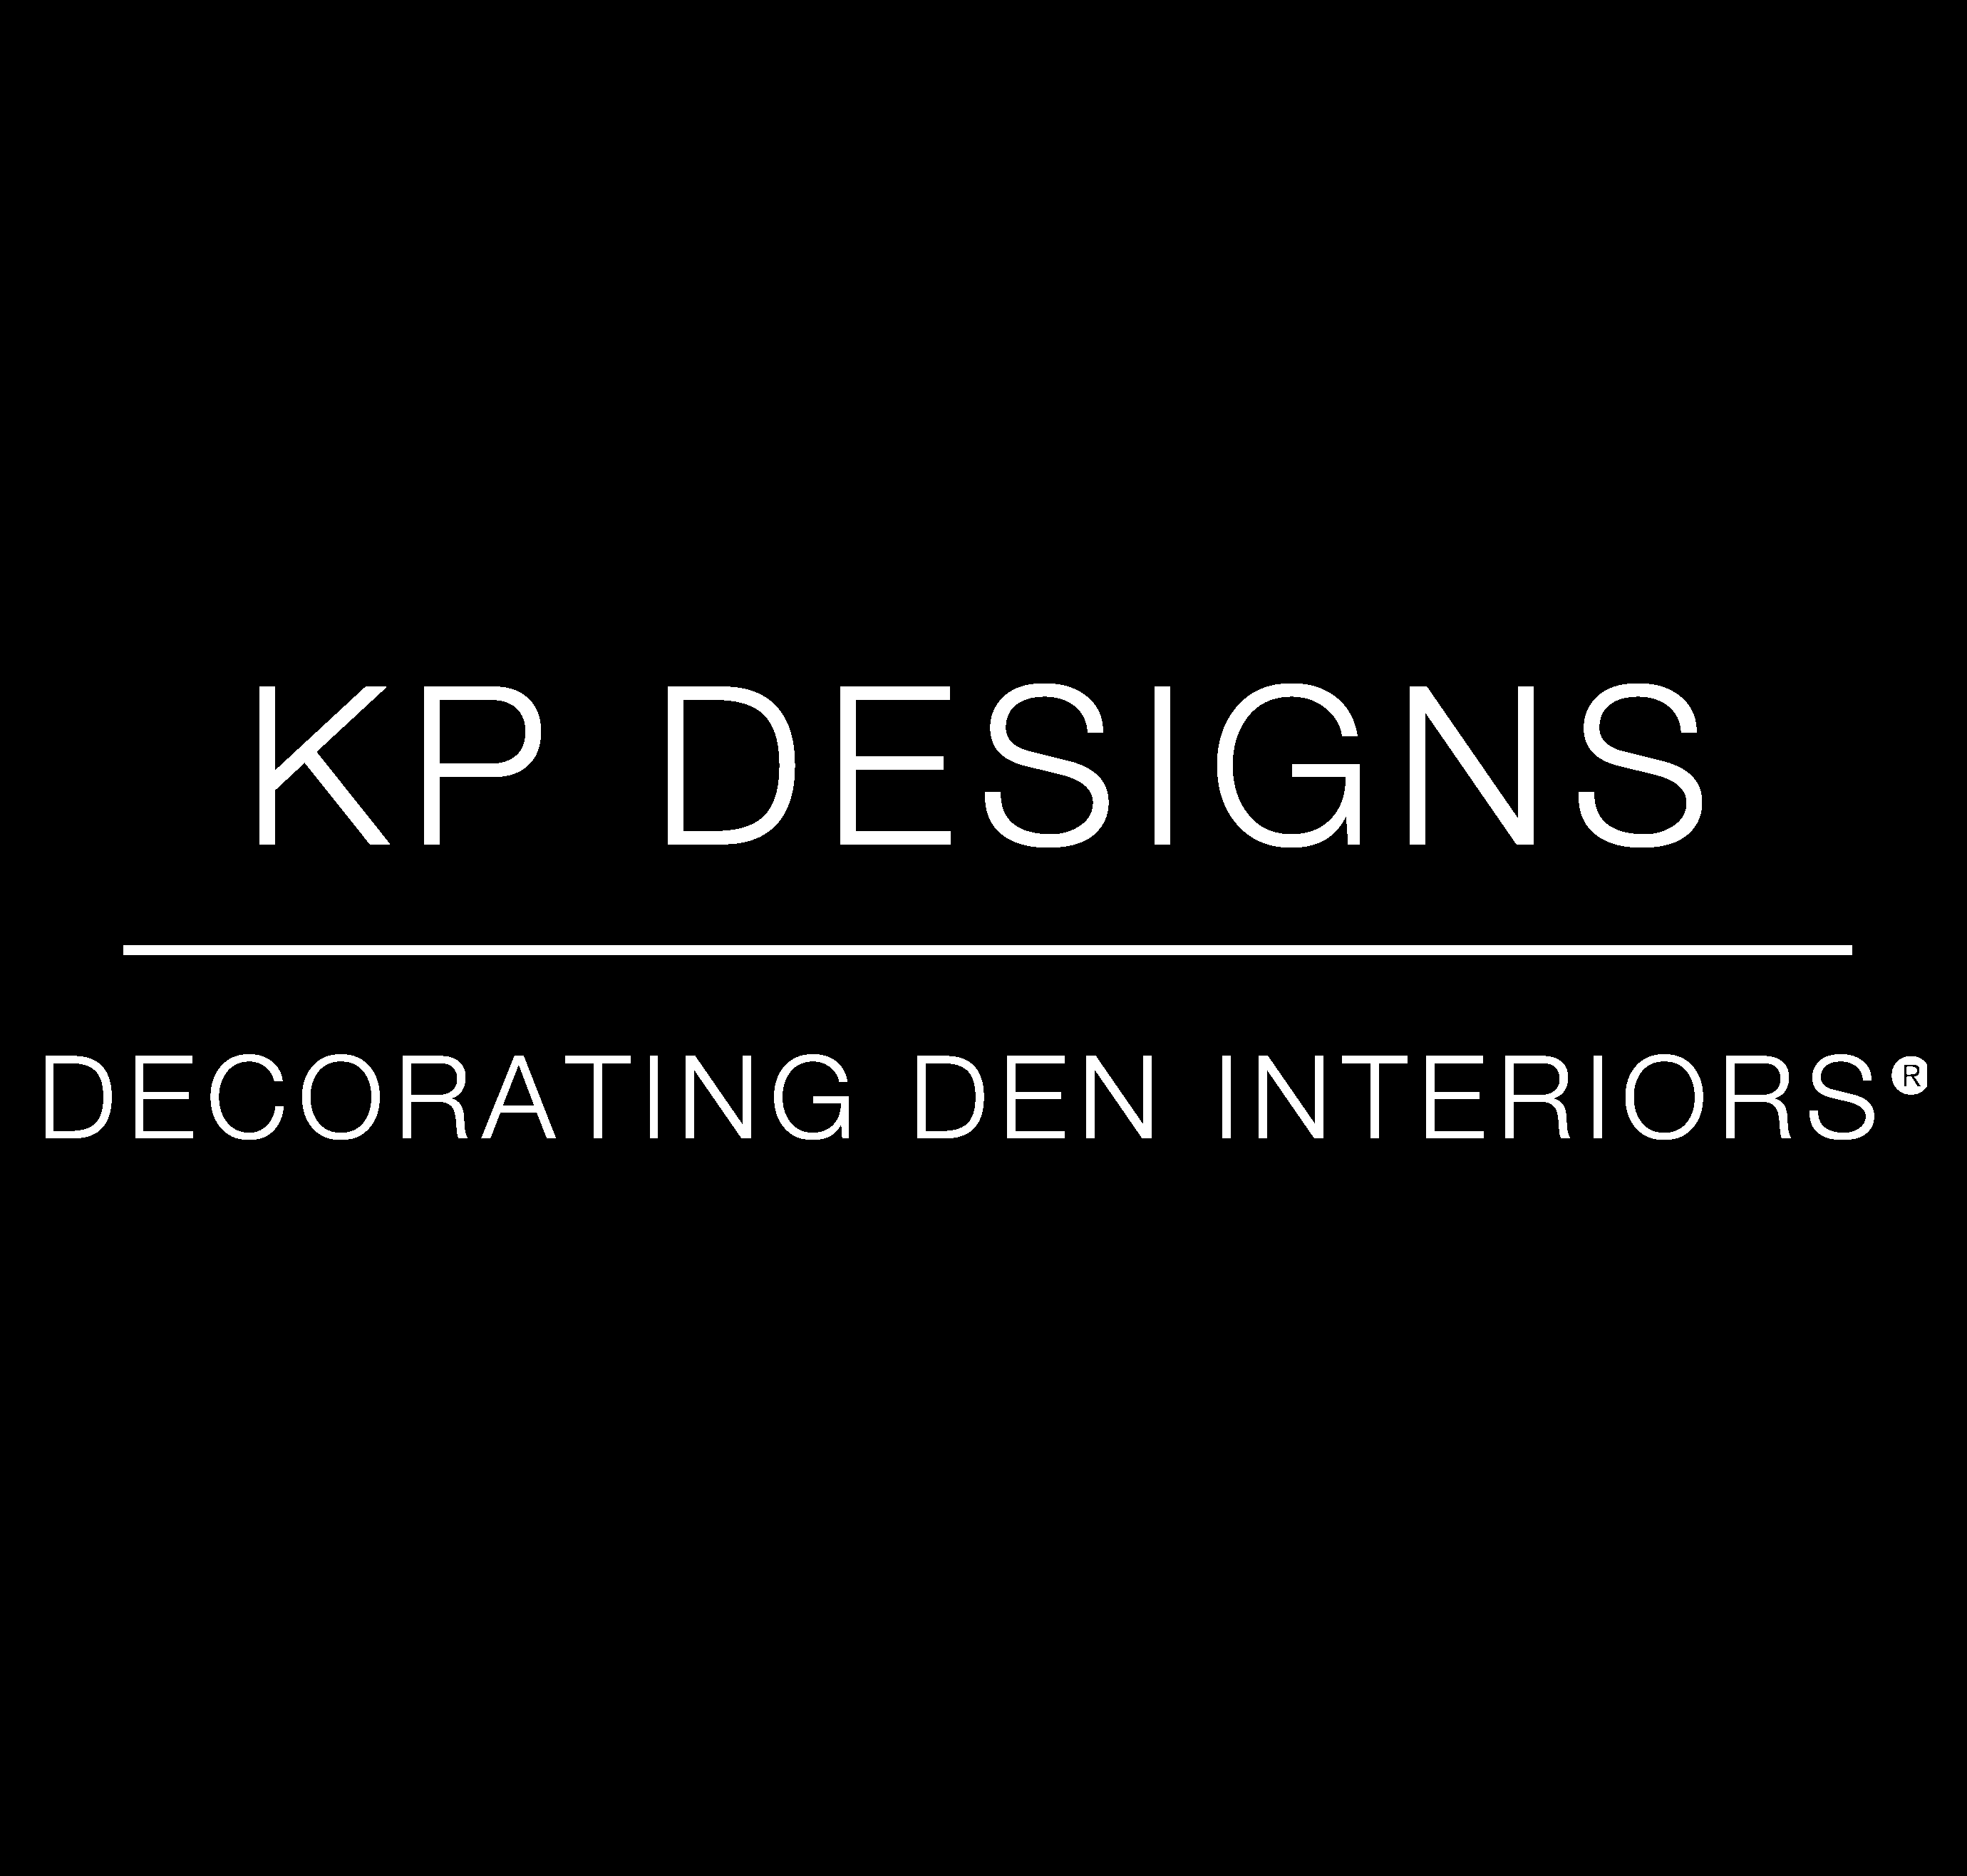 On The News: Kristen Talks About the KP Designs’ Room at This Year’s Holiday Designer Showhouse!